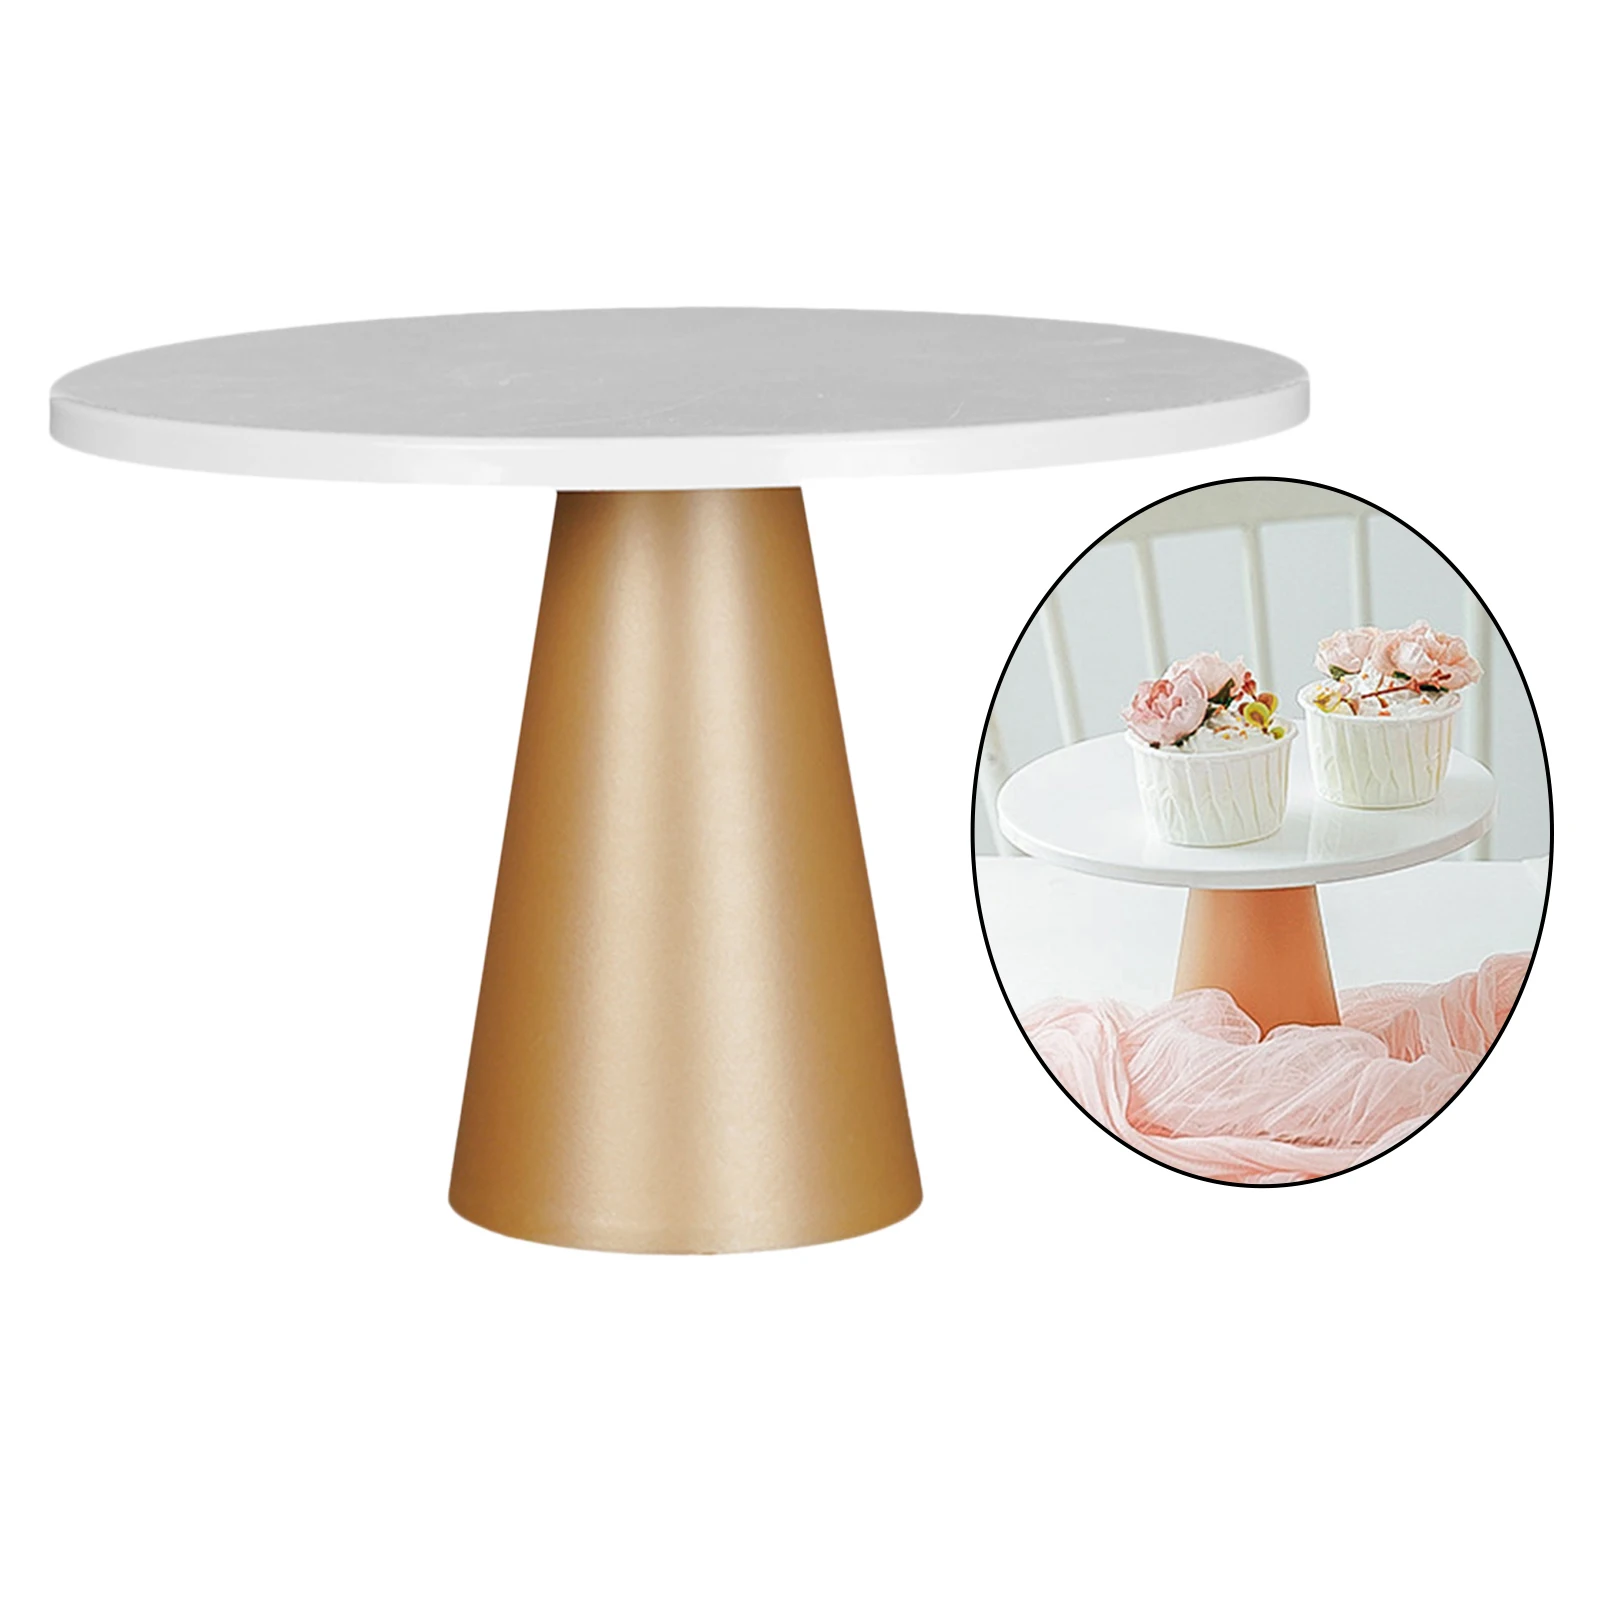 Wedding Table Cake Stands Golden Pie Plate Tray Shelf Party Kitchen Supplies